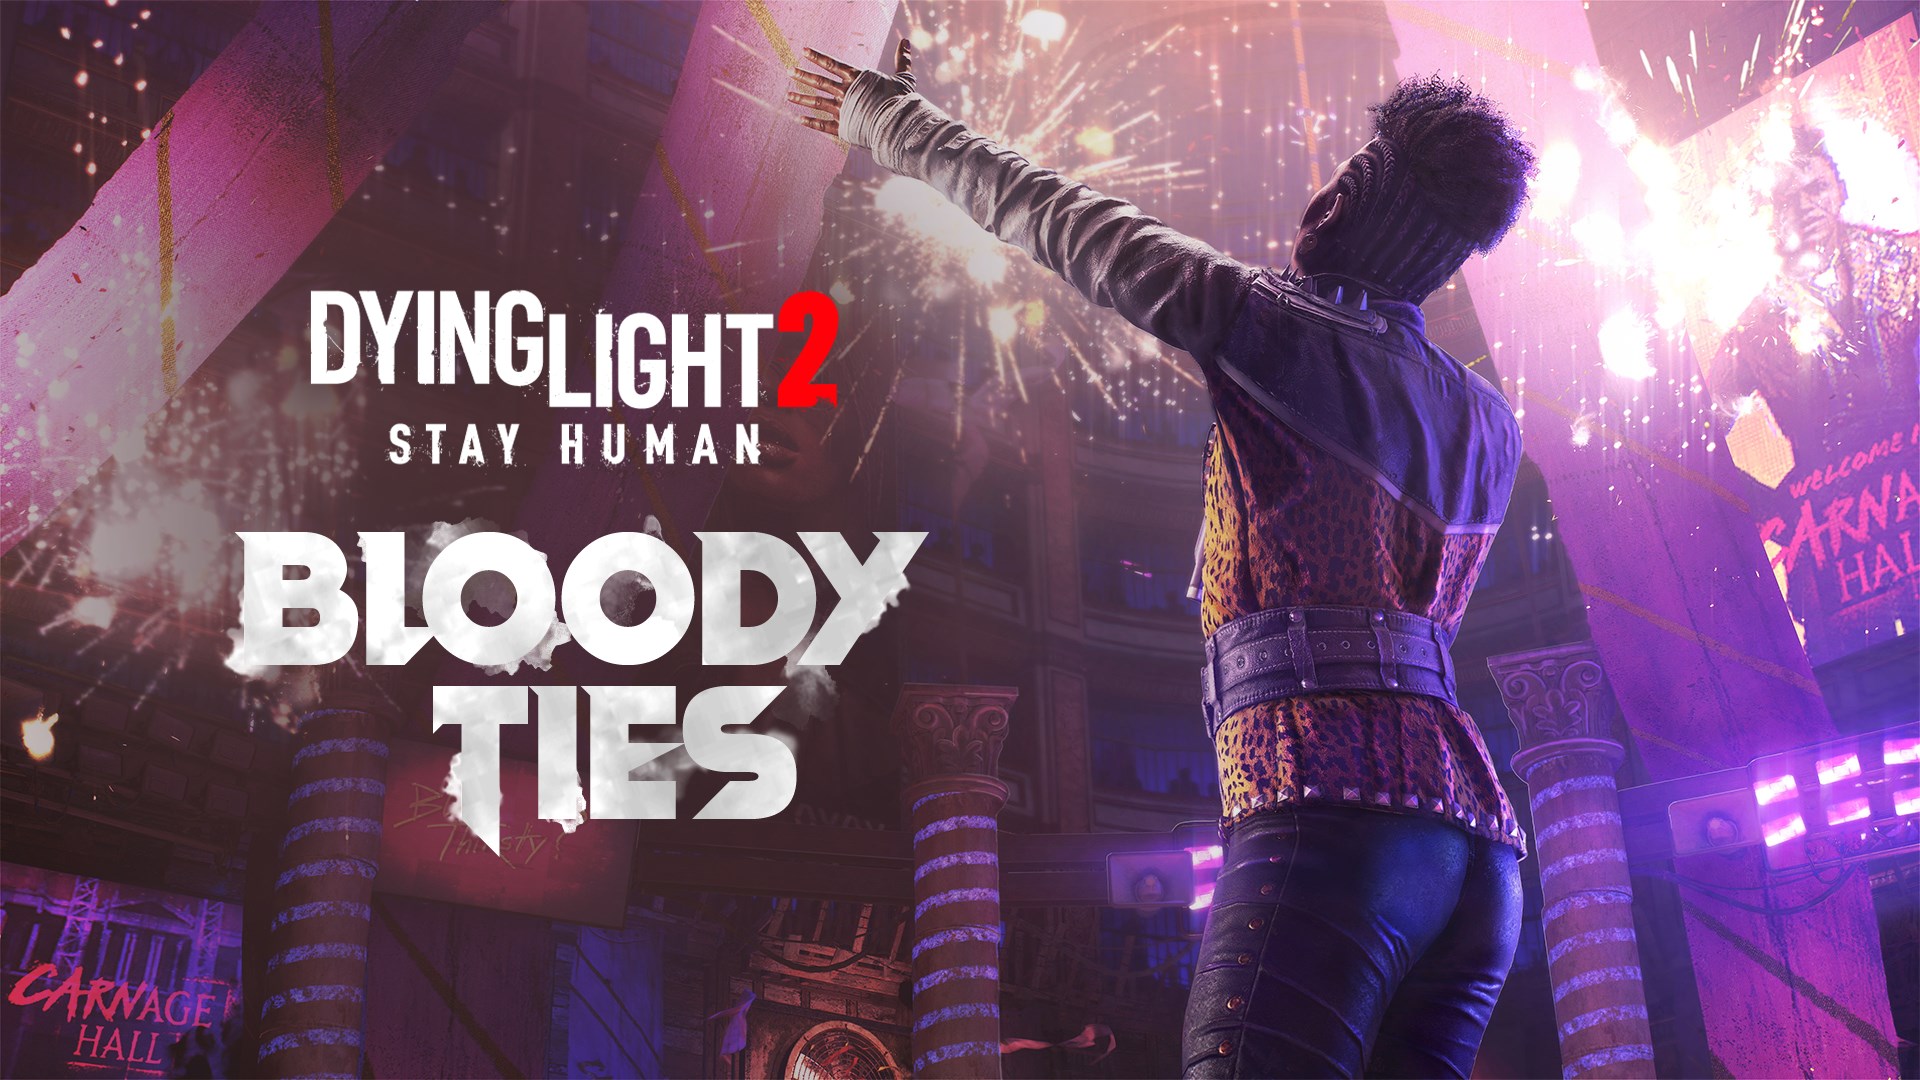 Dying Light 2 Stay Human - Bloody Ties